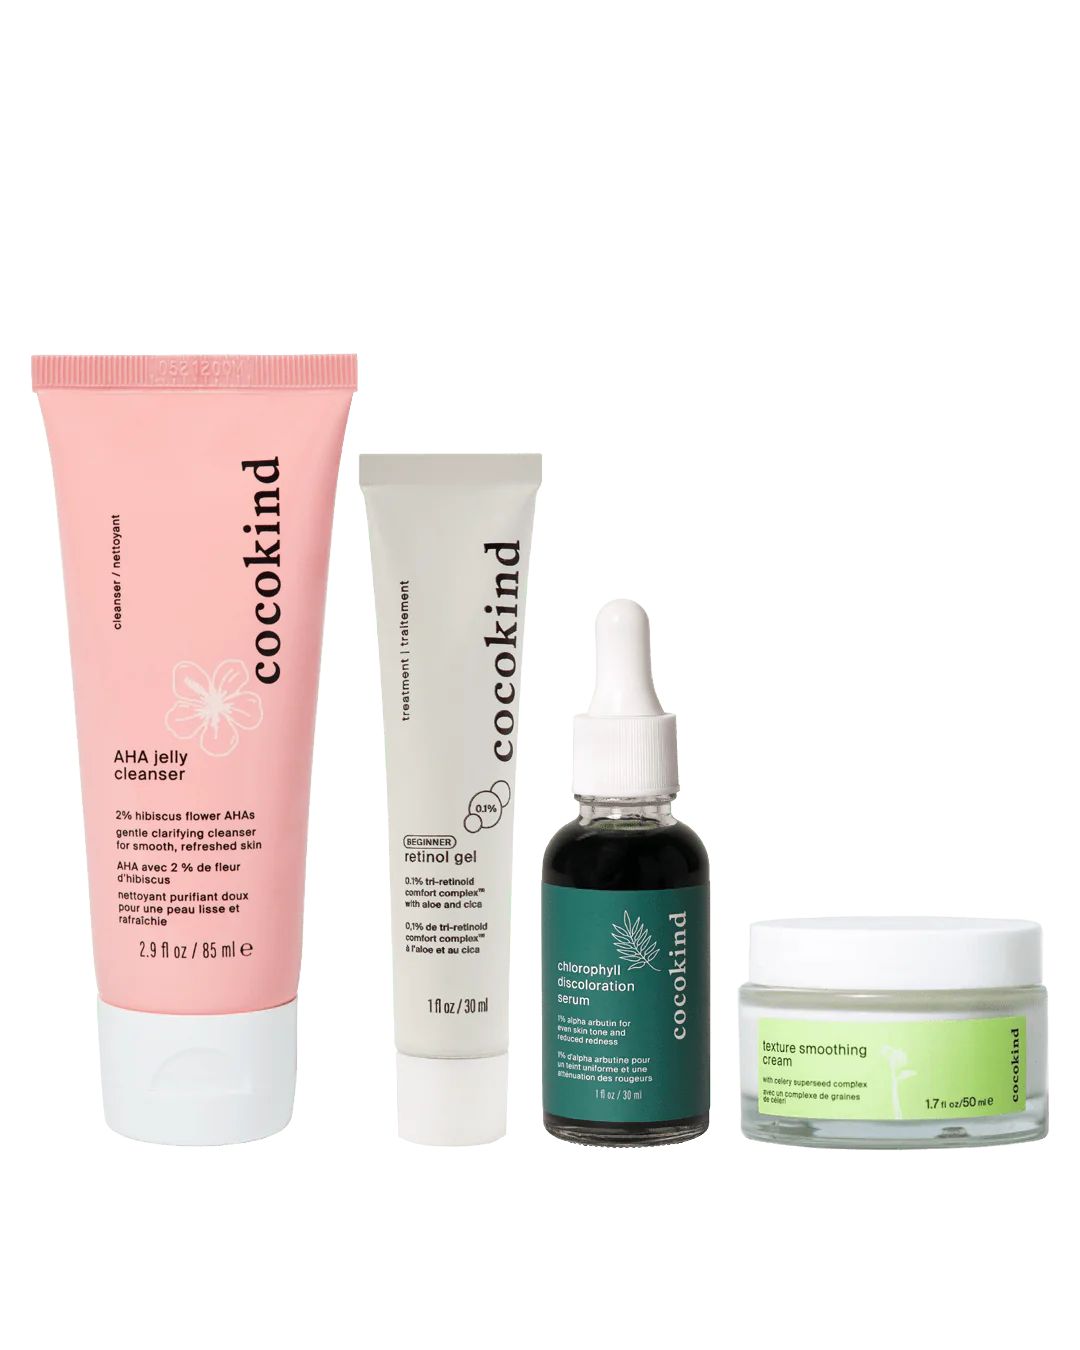 discoloration correcting routine | Cocokind